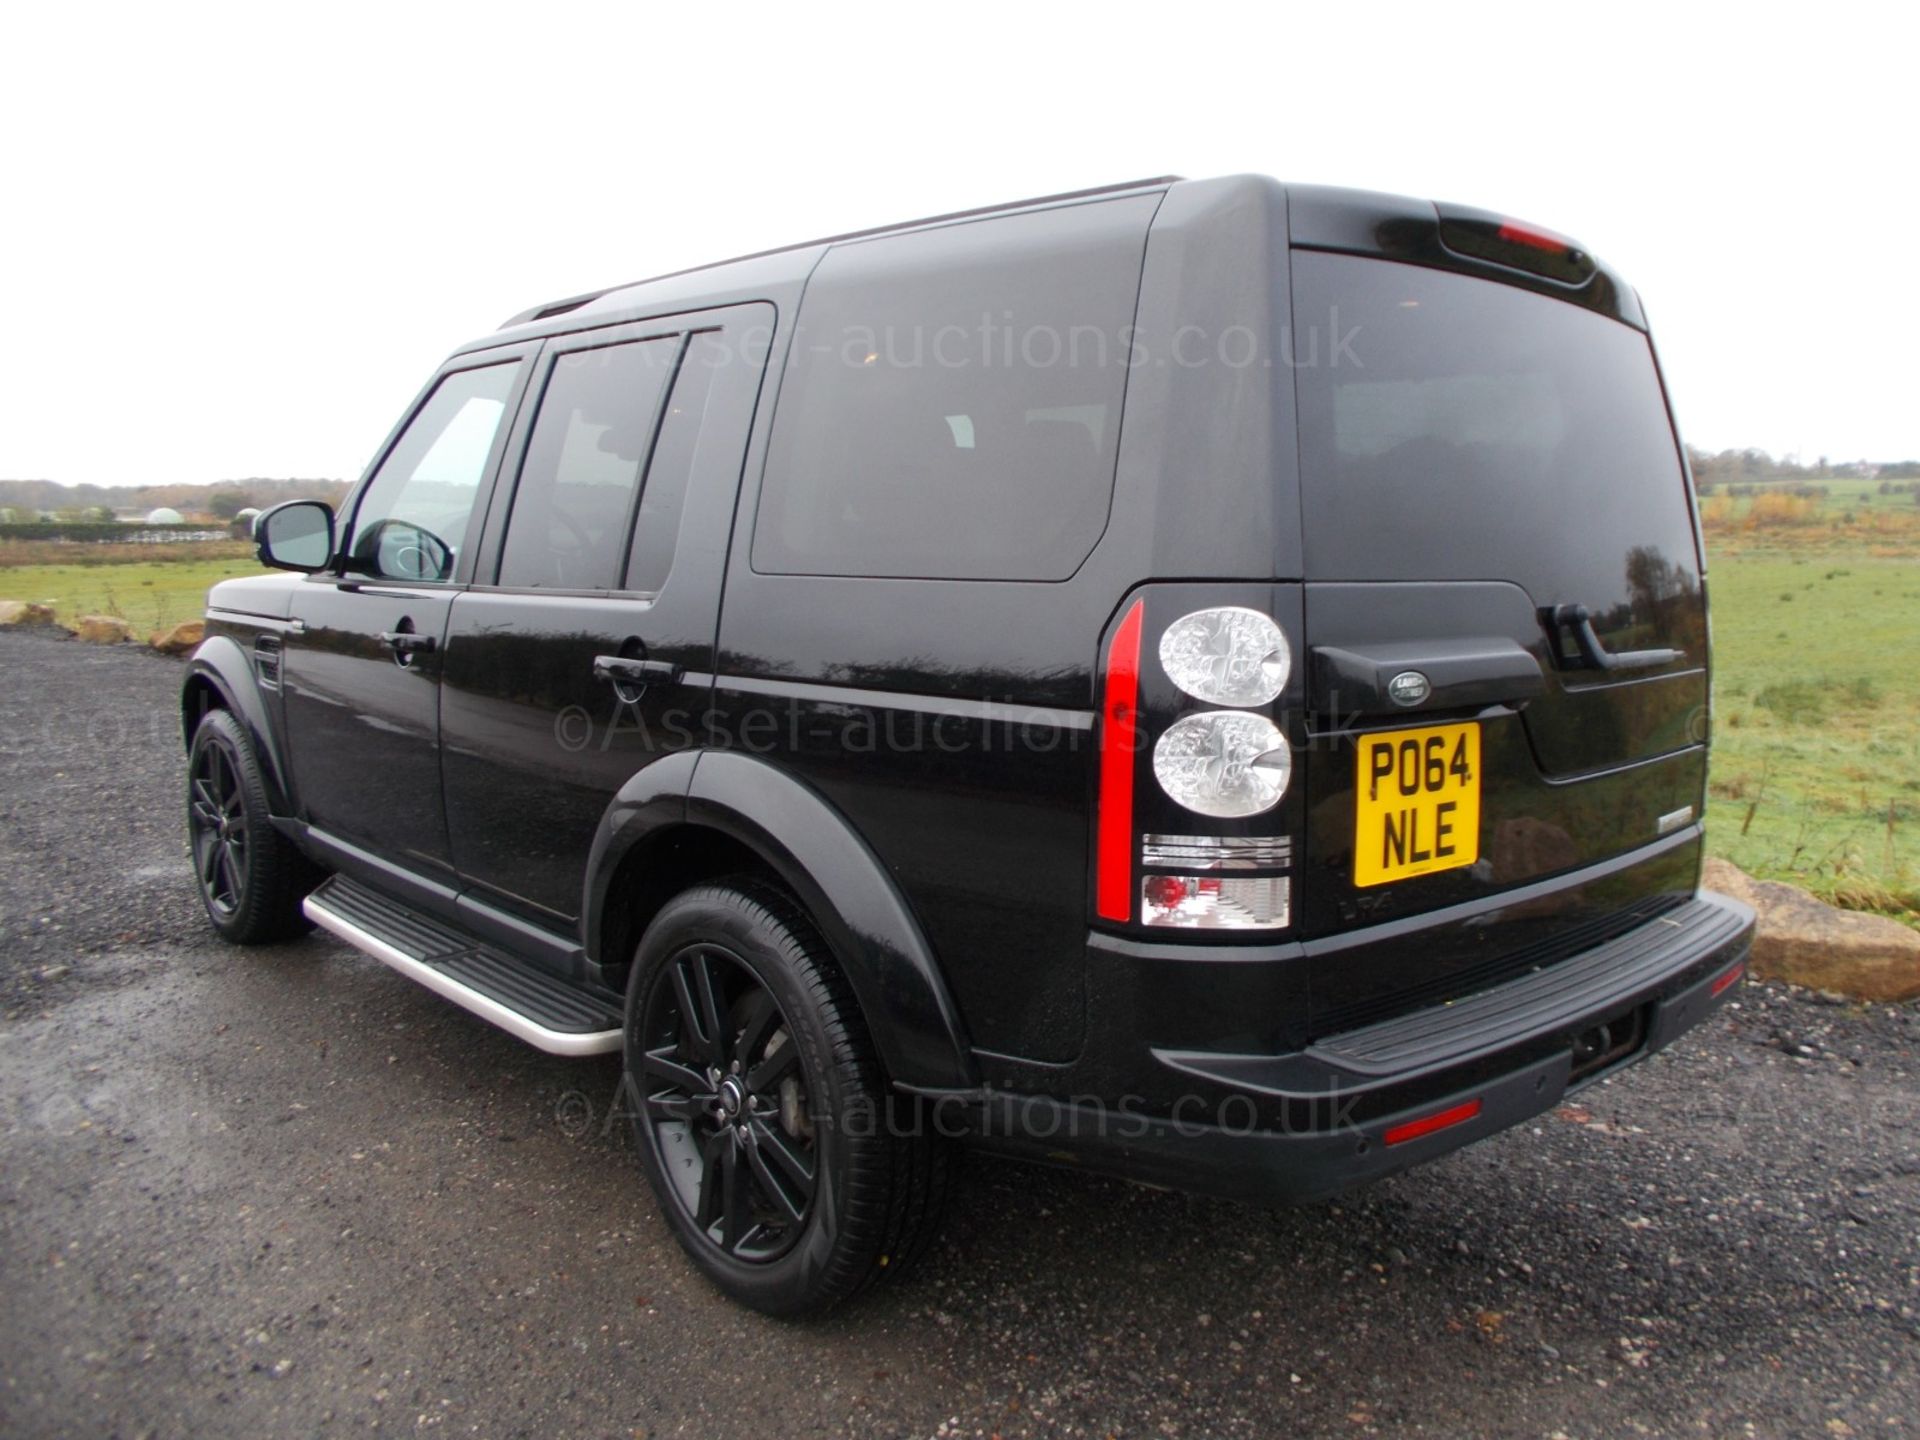 2015/64 LAND ROVER DISCOVERY HSE LUXURY SCV6 7 SEATER, 3.0 V6 PETROL SUPERCHARGED *PLUS VAT* - Image 5 of 28